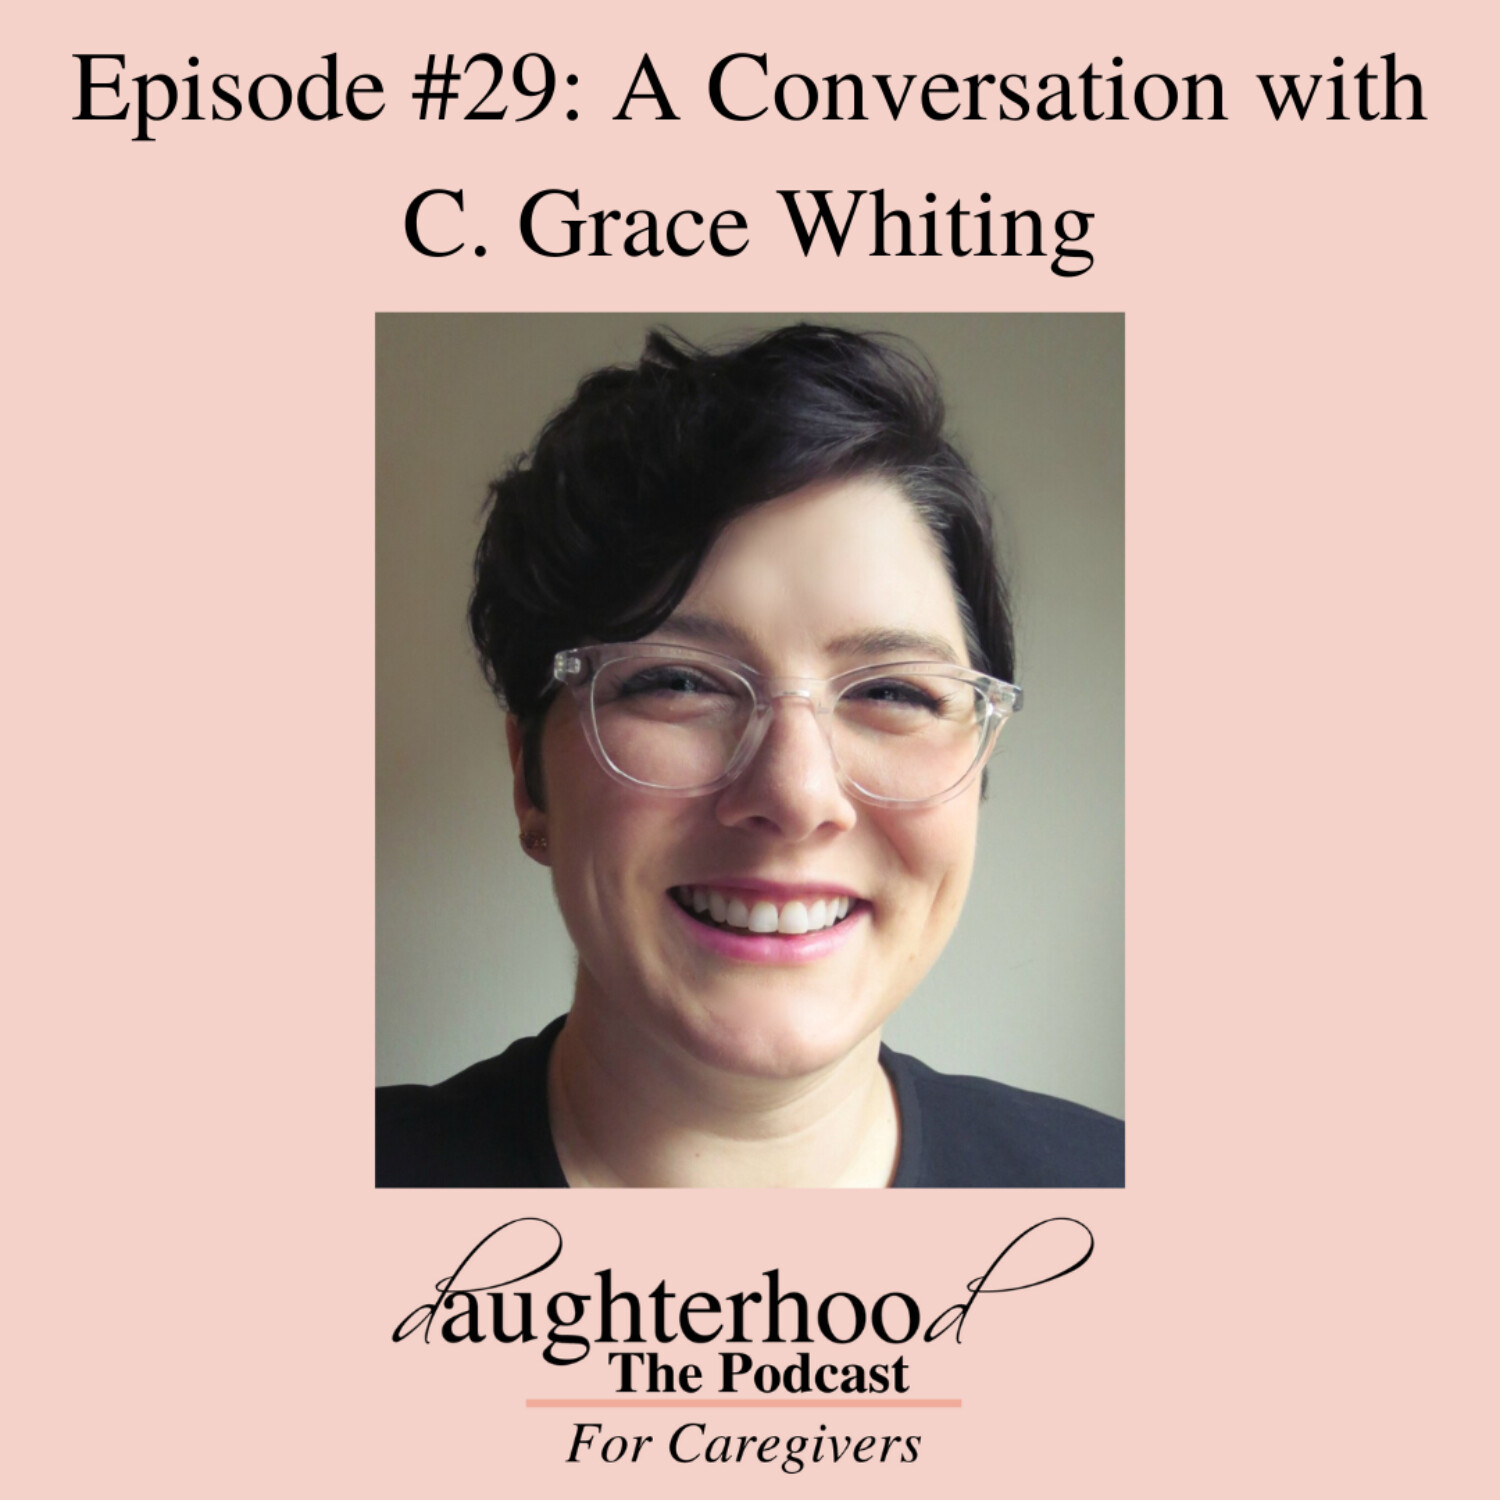 A Conversation with C Grace Whiting